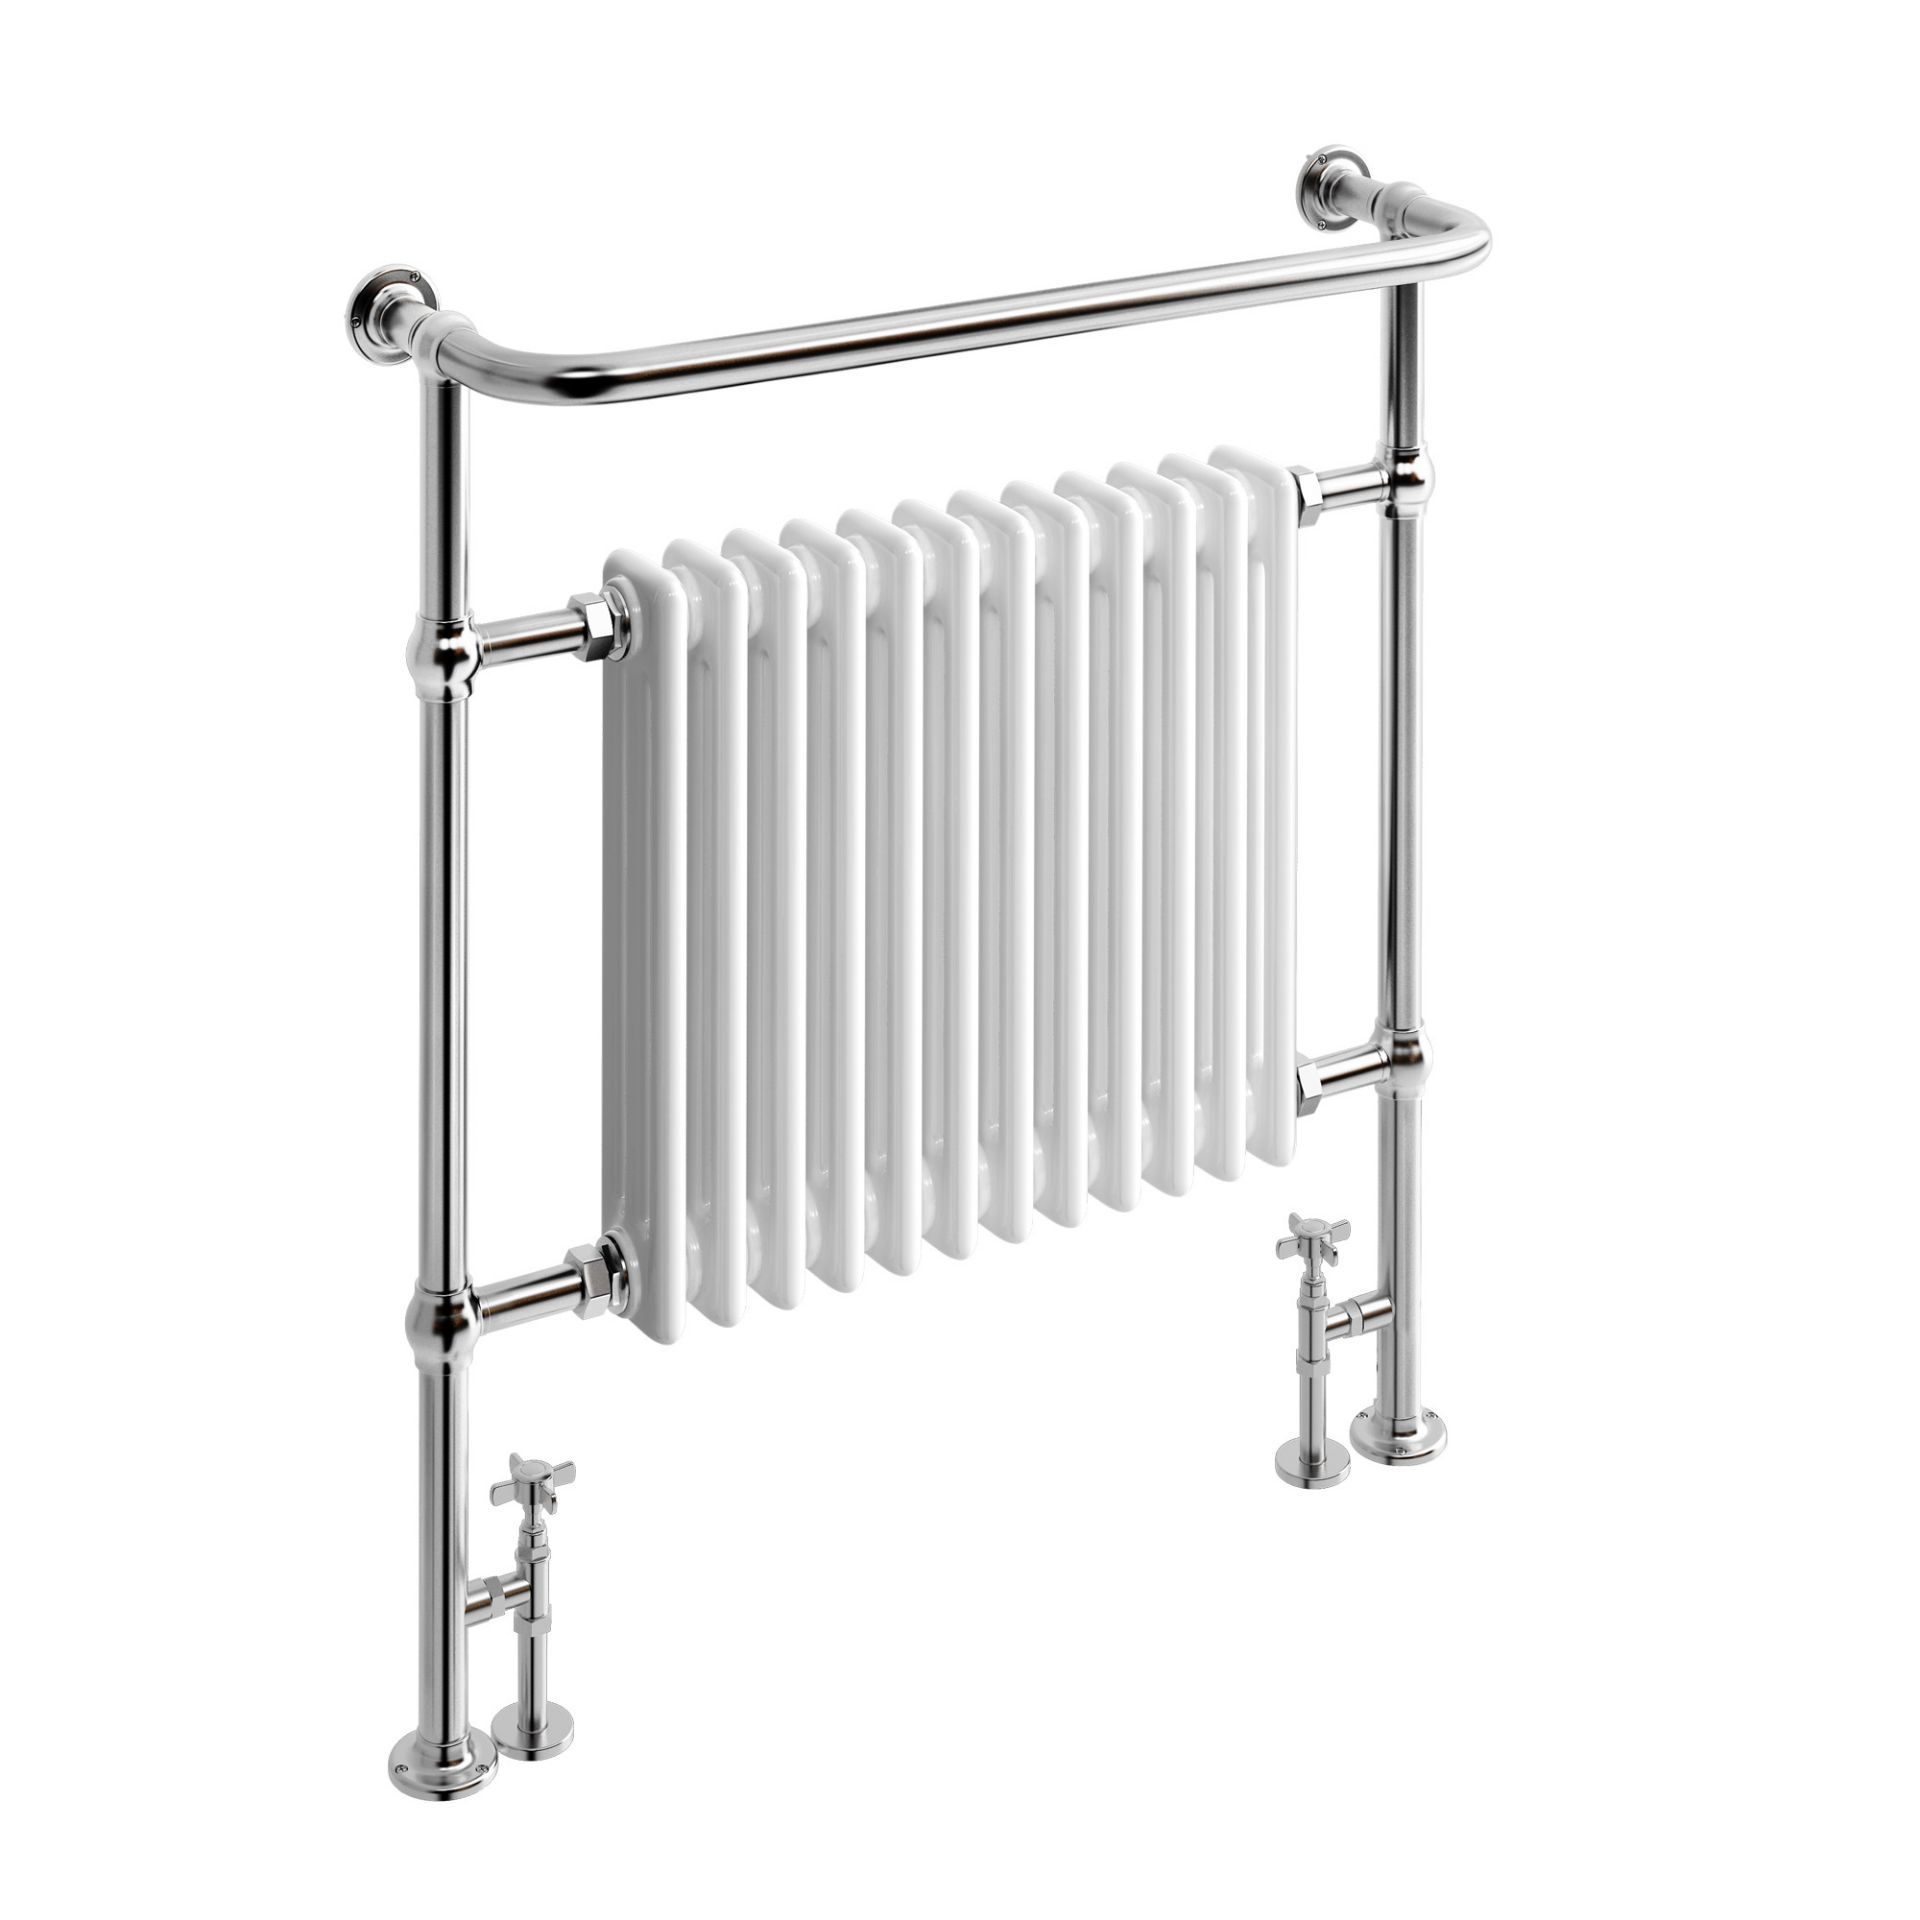 New & Boxed 952x839mm Large Traditional White Towel Rail Radiator - Victoria Premium. Rrp £43... - Image 3 of 3